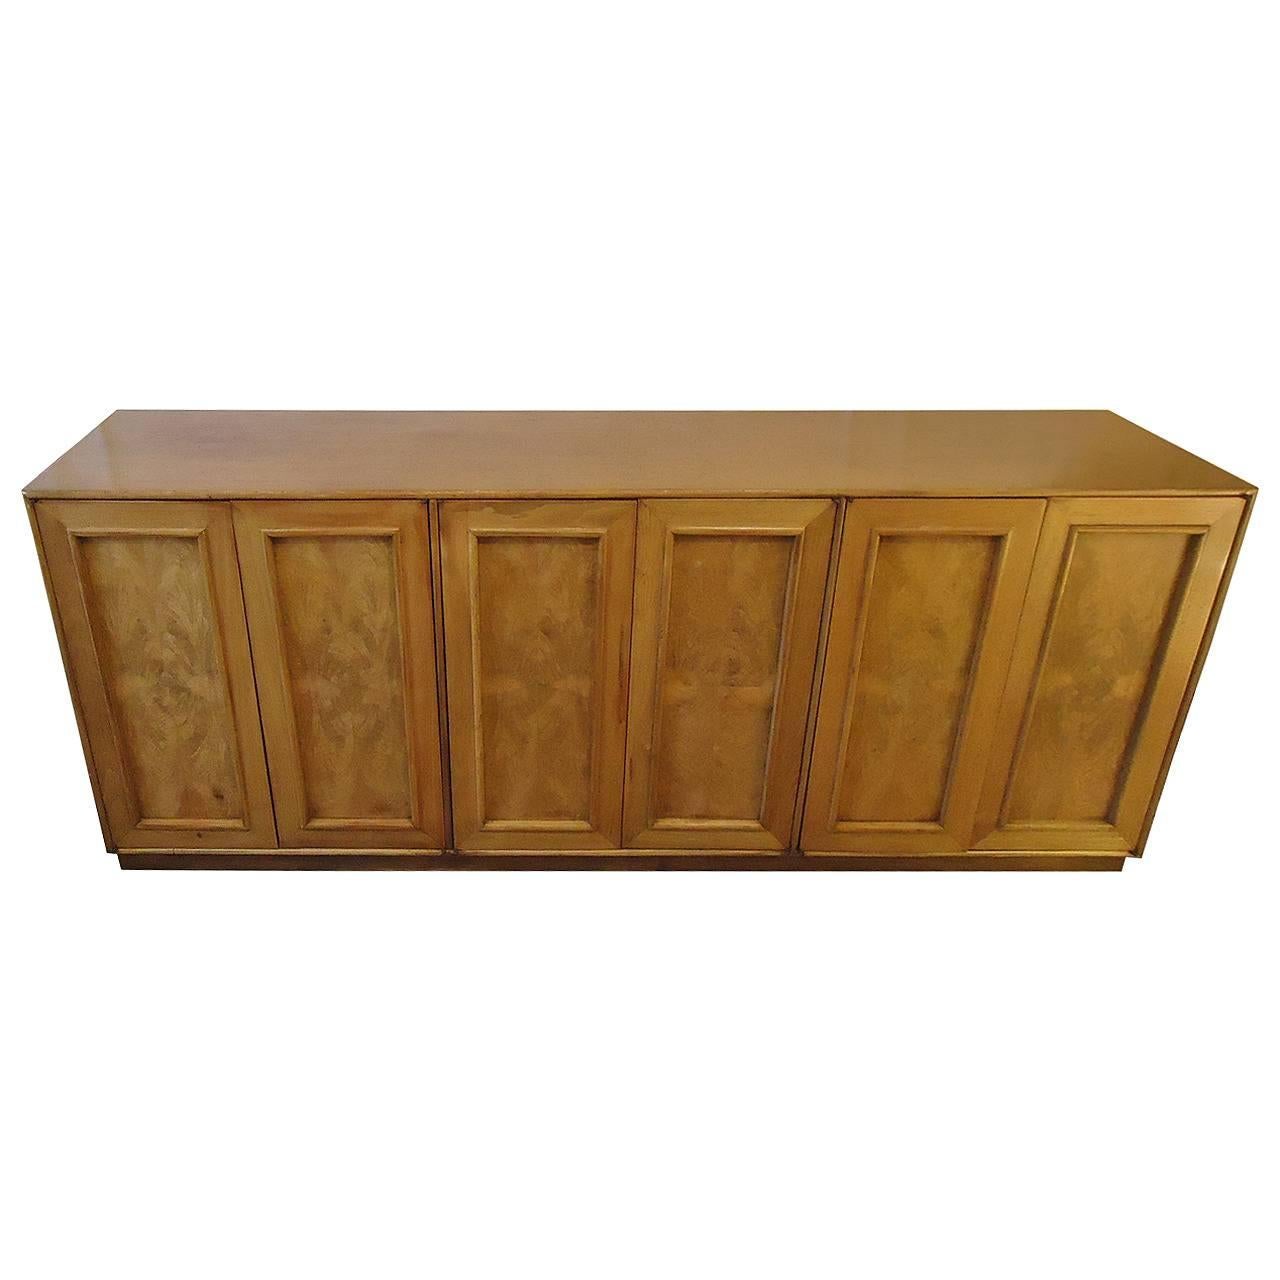 Mid-Century Modern Milo Baughman for Directional Credenza or Sideboard